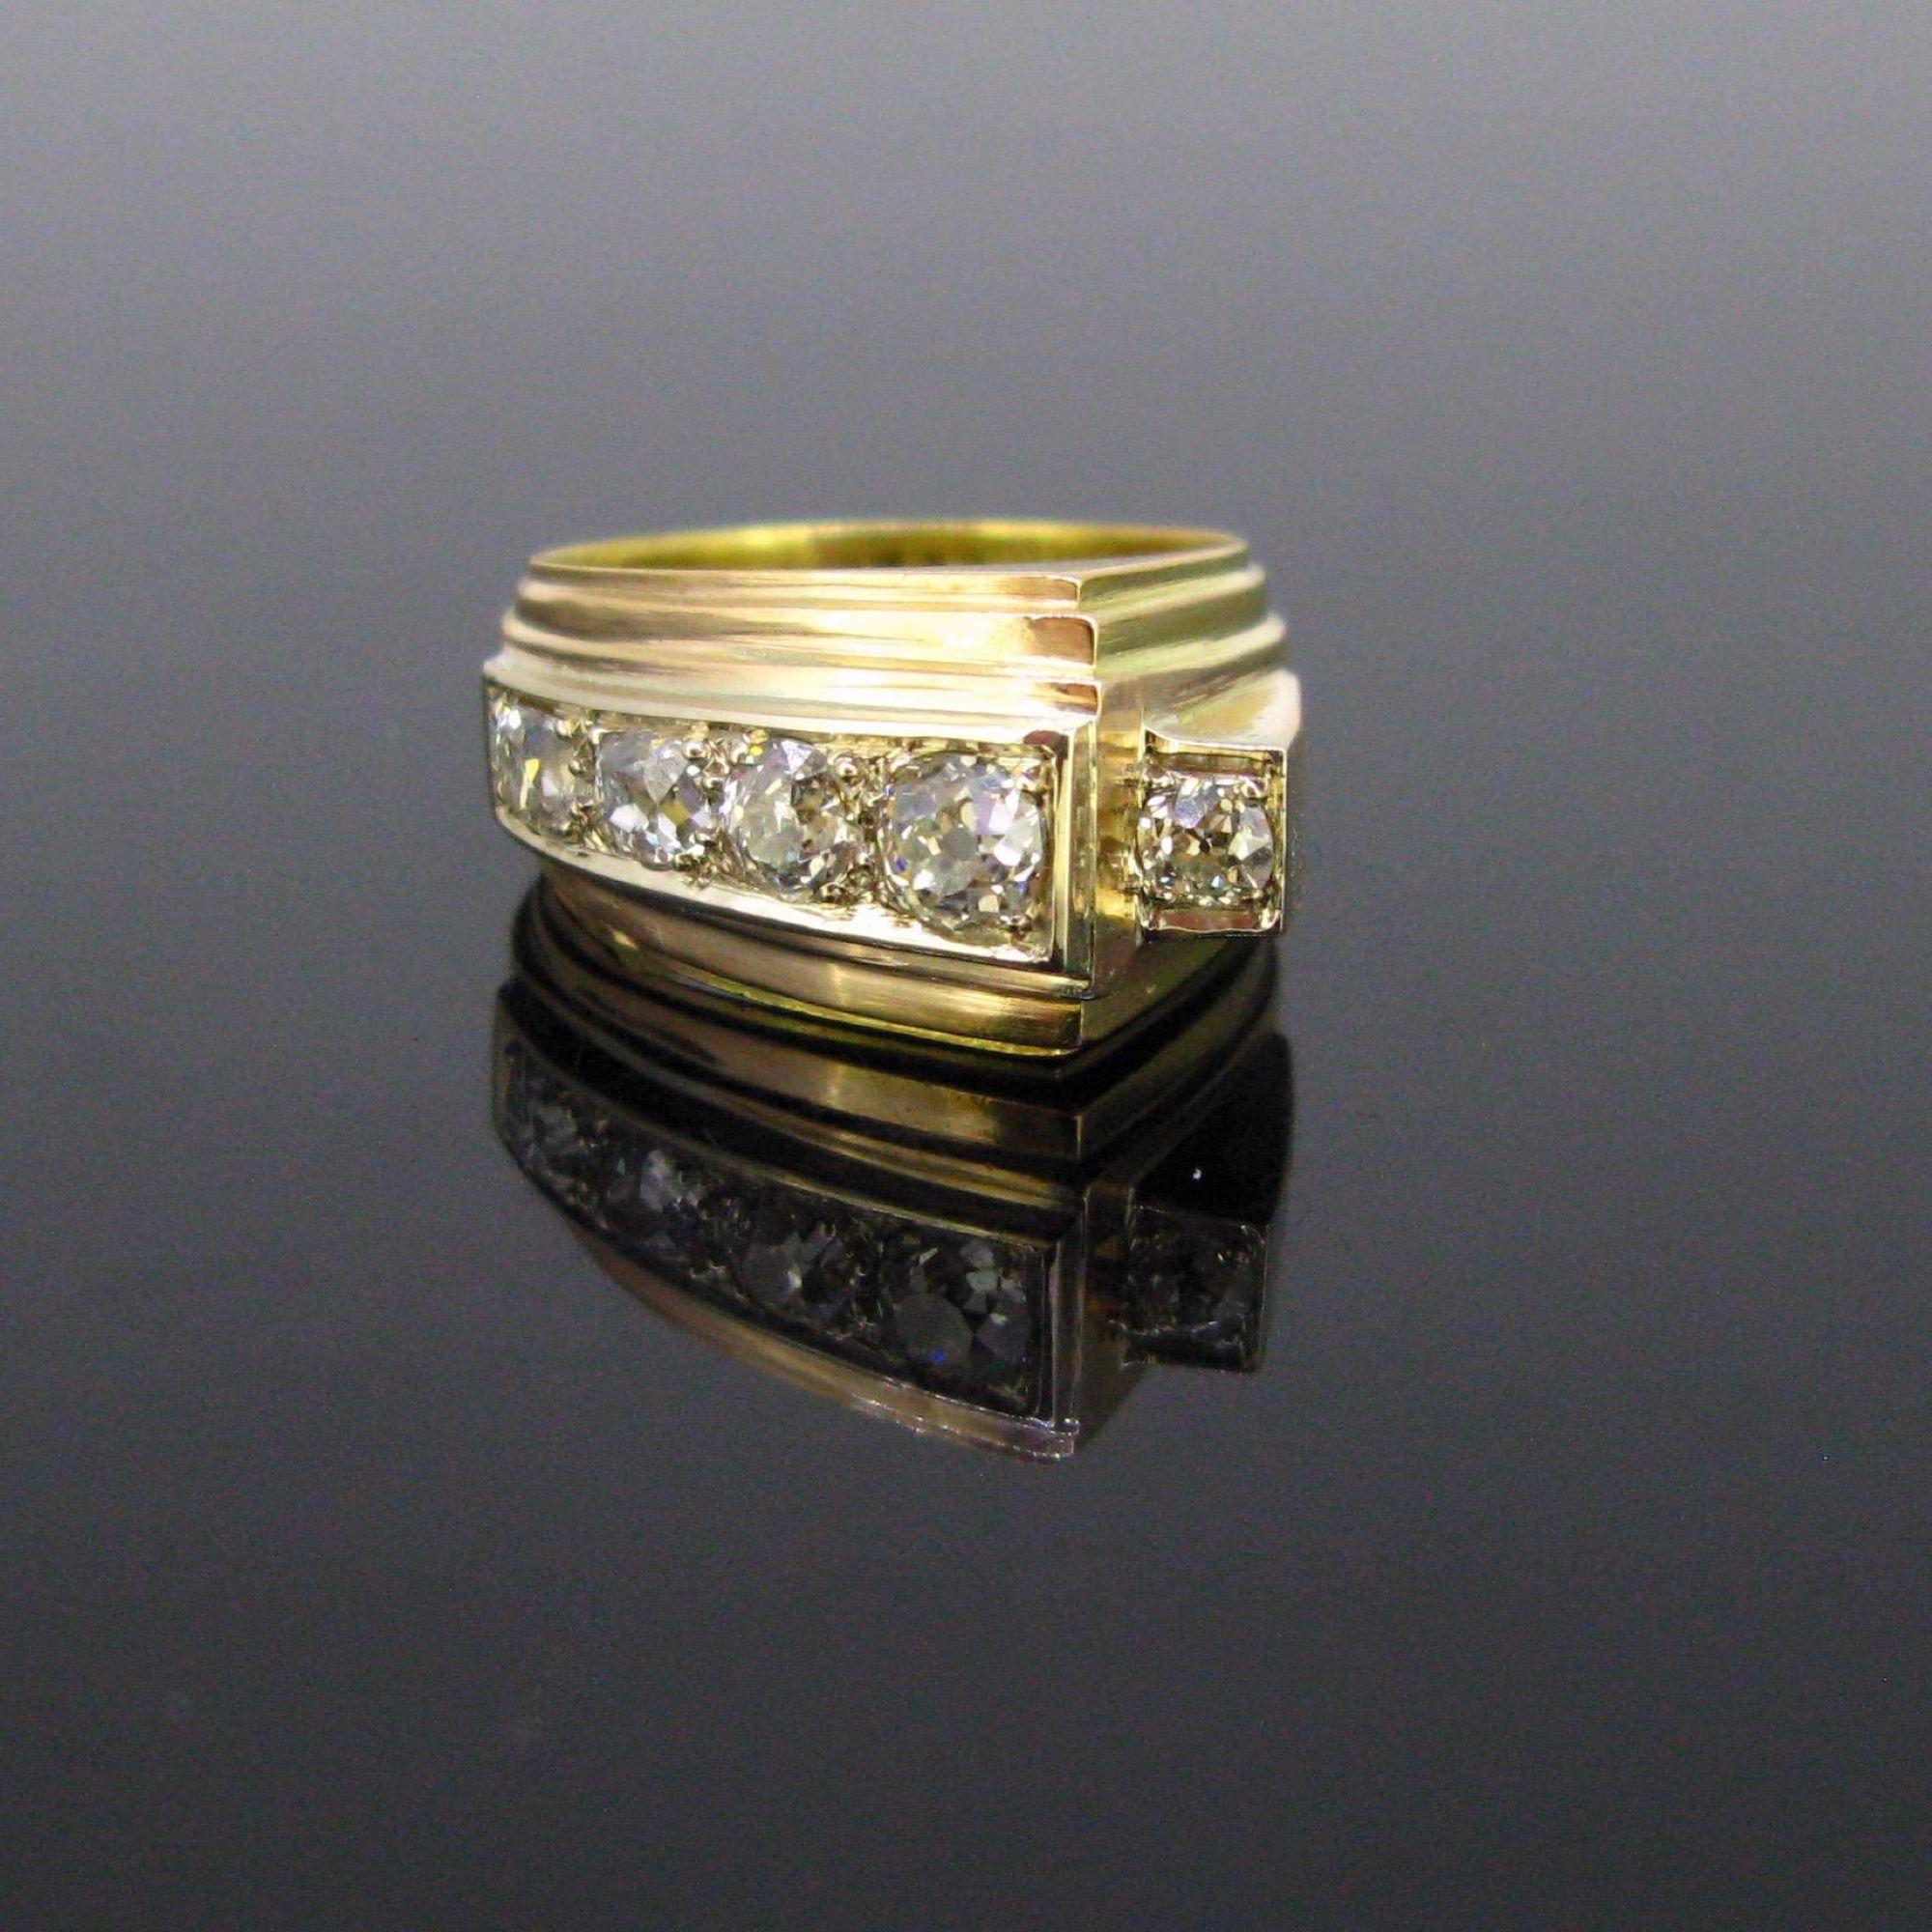 Weight:	9,8gr

Metal:	18kt yellow and rose Gold 
	Platinum

Stones:	5 diamonds
•	Total carat weight:	1.50ct approximately
•	Cut:	Old mine 
•	Colour:	H –I
•	Clarity:	VS-SI


Condition:	Very Good


Comments: 	This ring is from the Retro period. It is